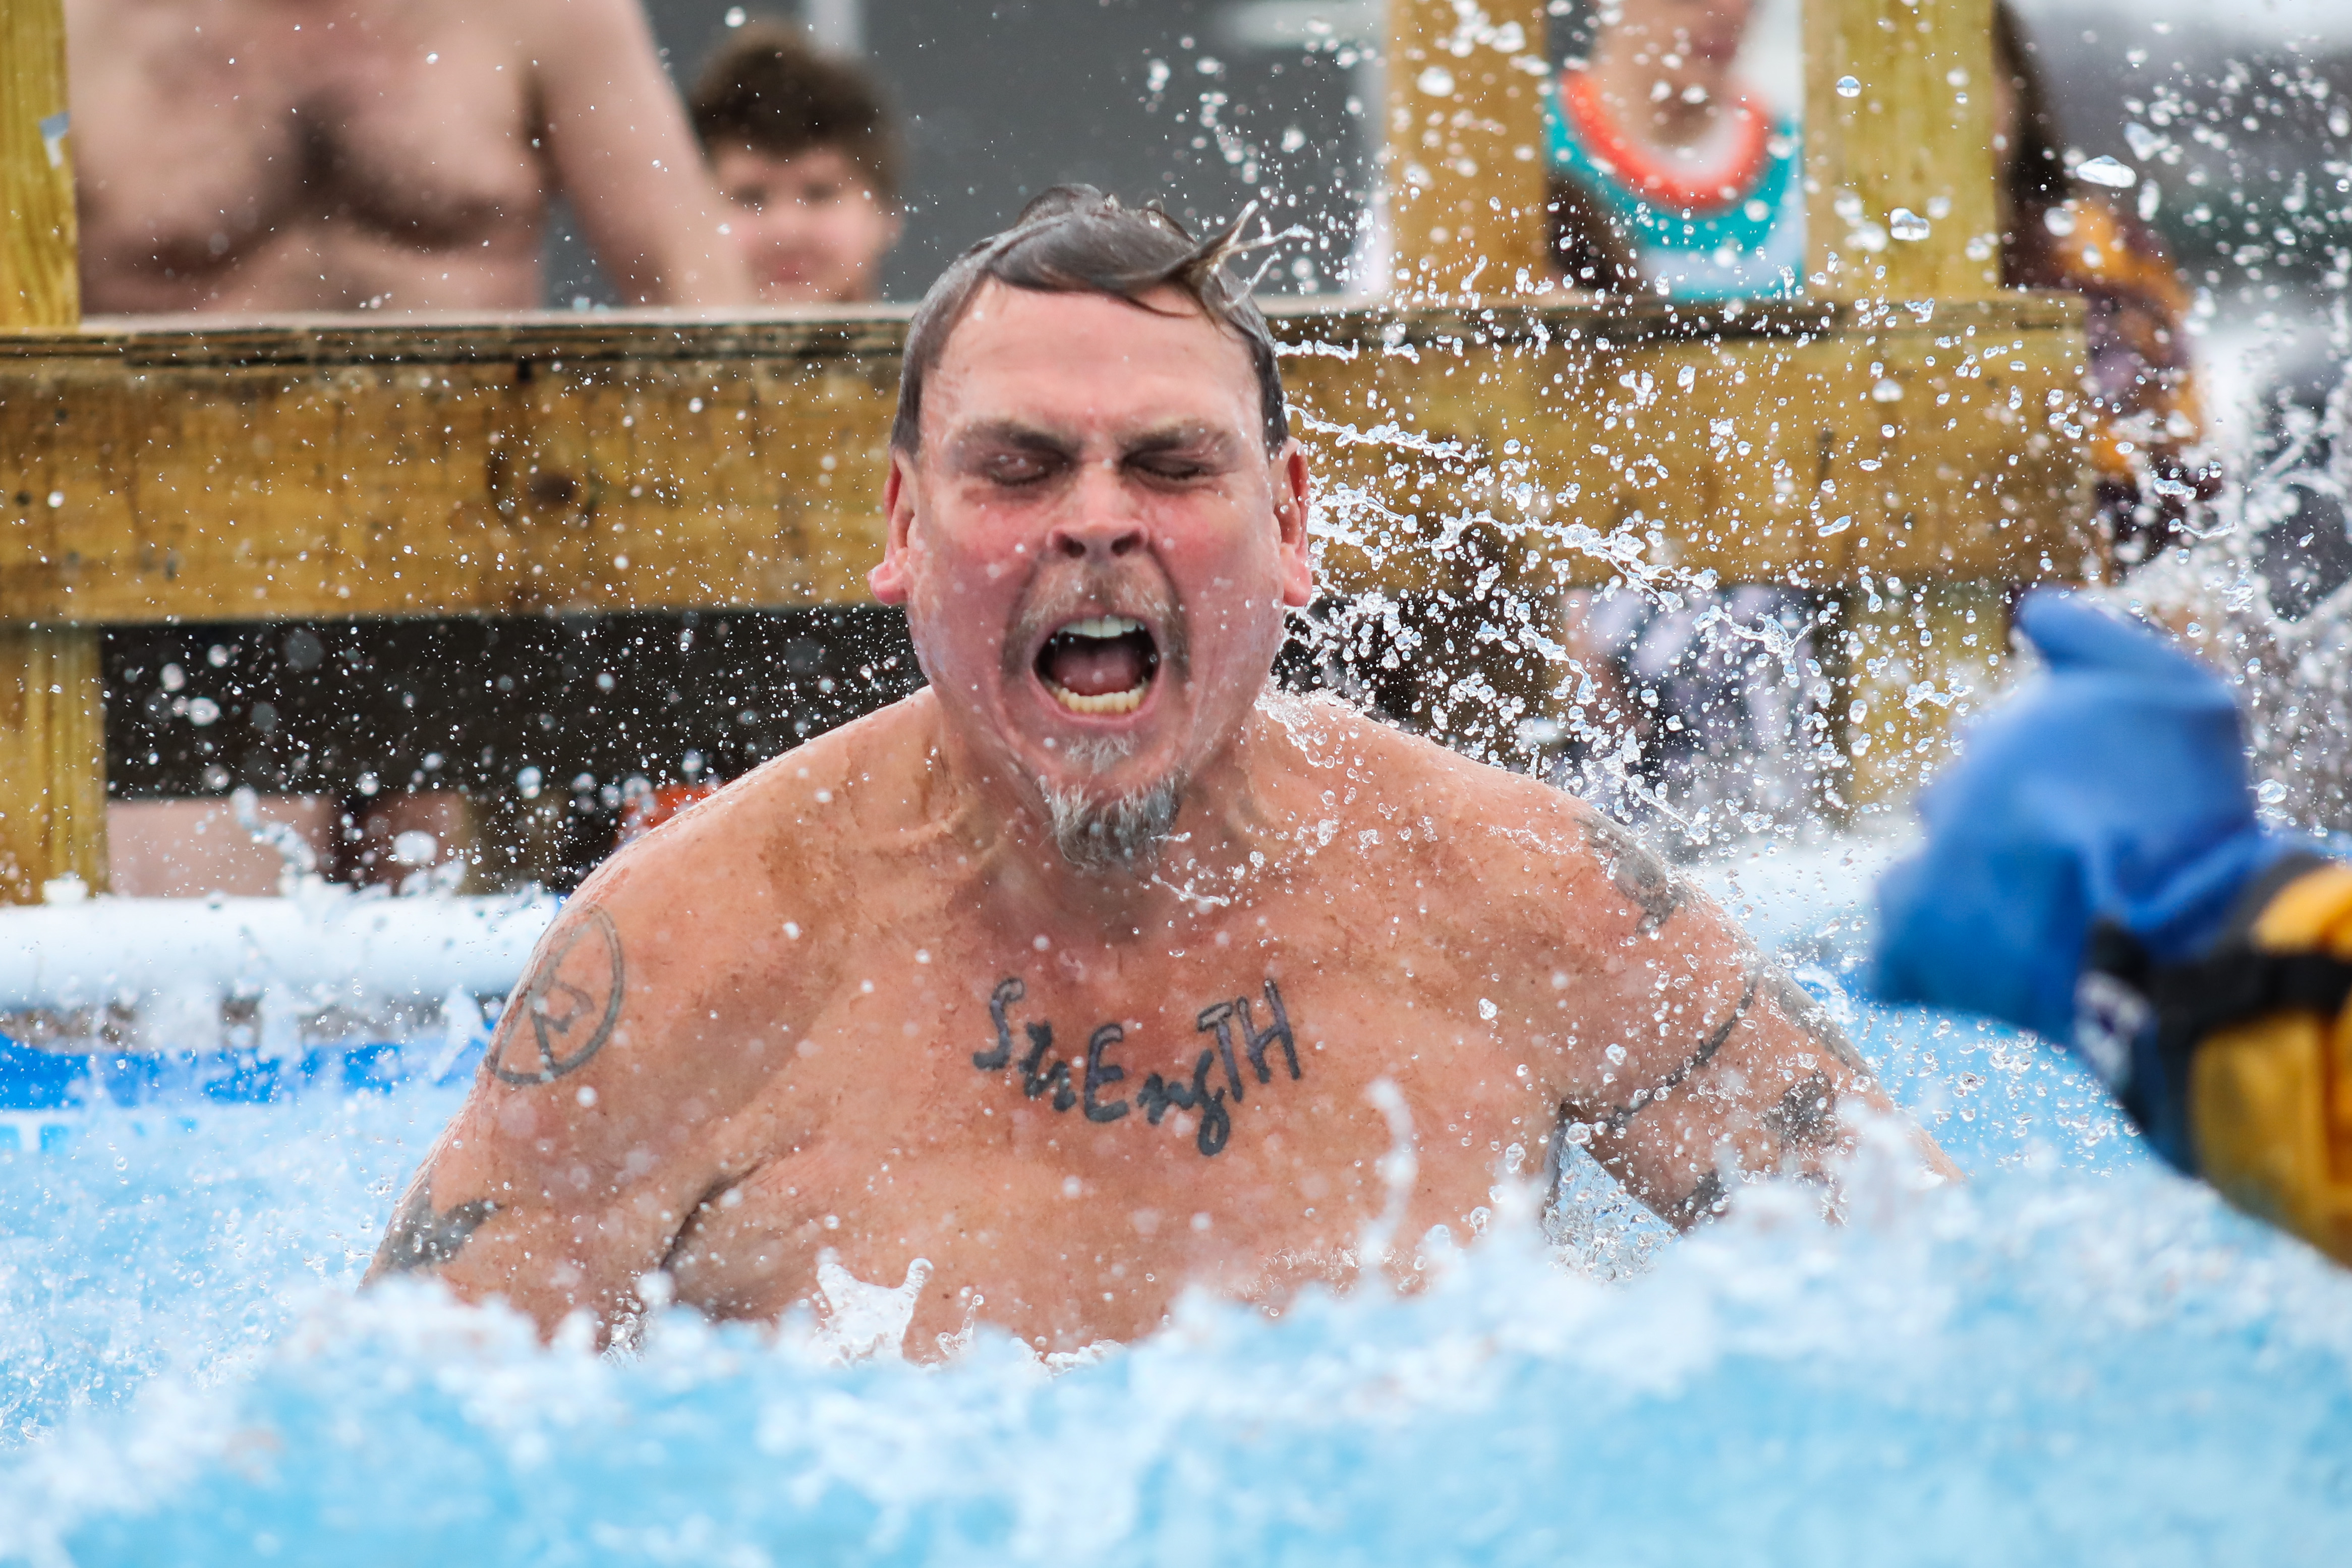 A jumper in the 2019 Polar Plunge finding out just how cold the water really is in Mt. Pleasant, MI.